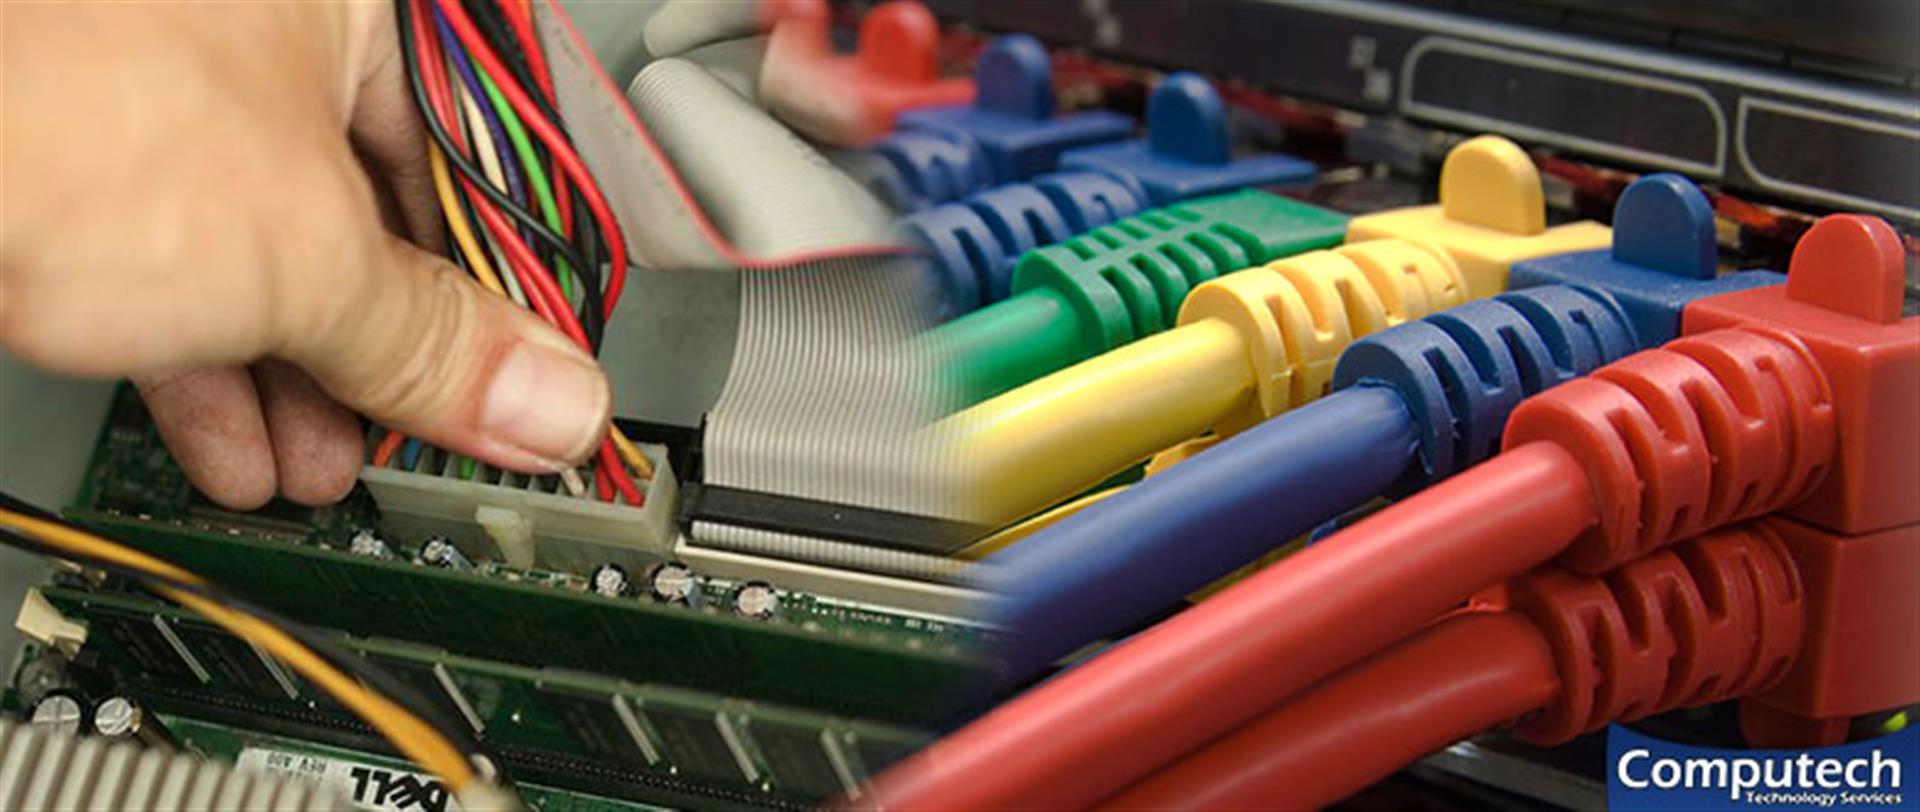 Clarksville Tennessee Onsite PC & Printer Repairs, Networking, Voice & Data Cabling Solutions